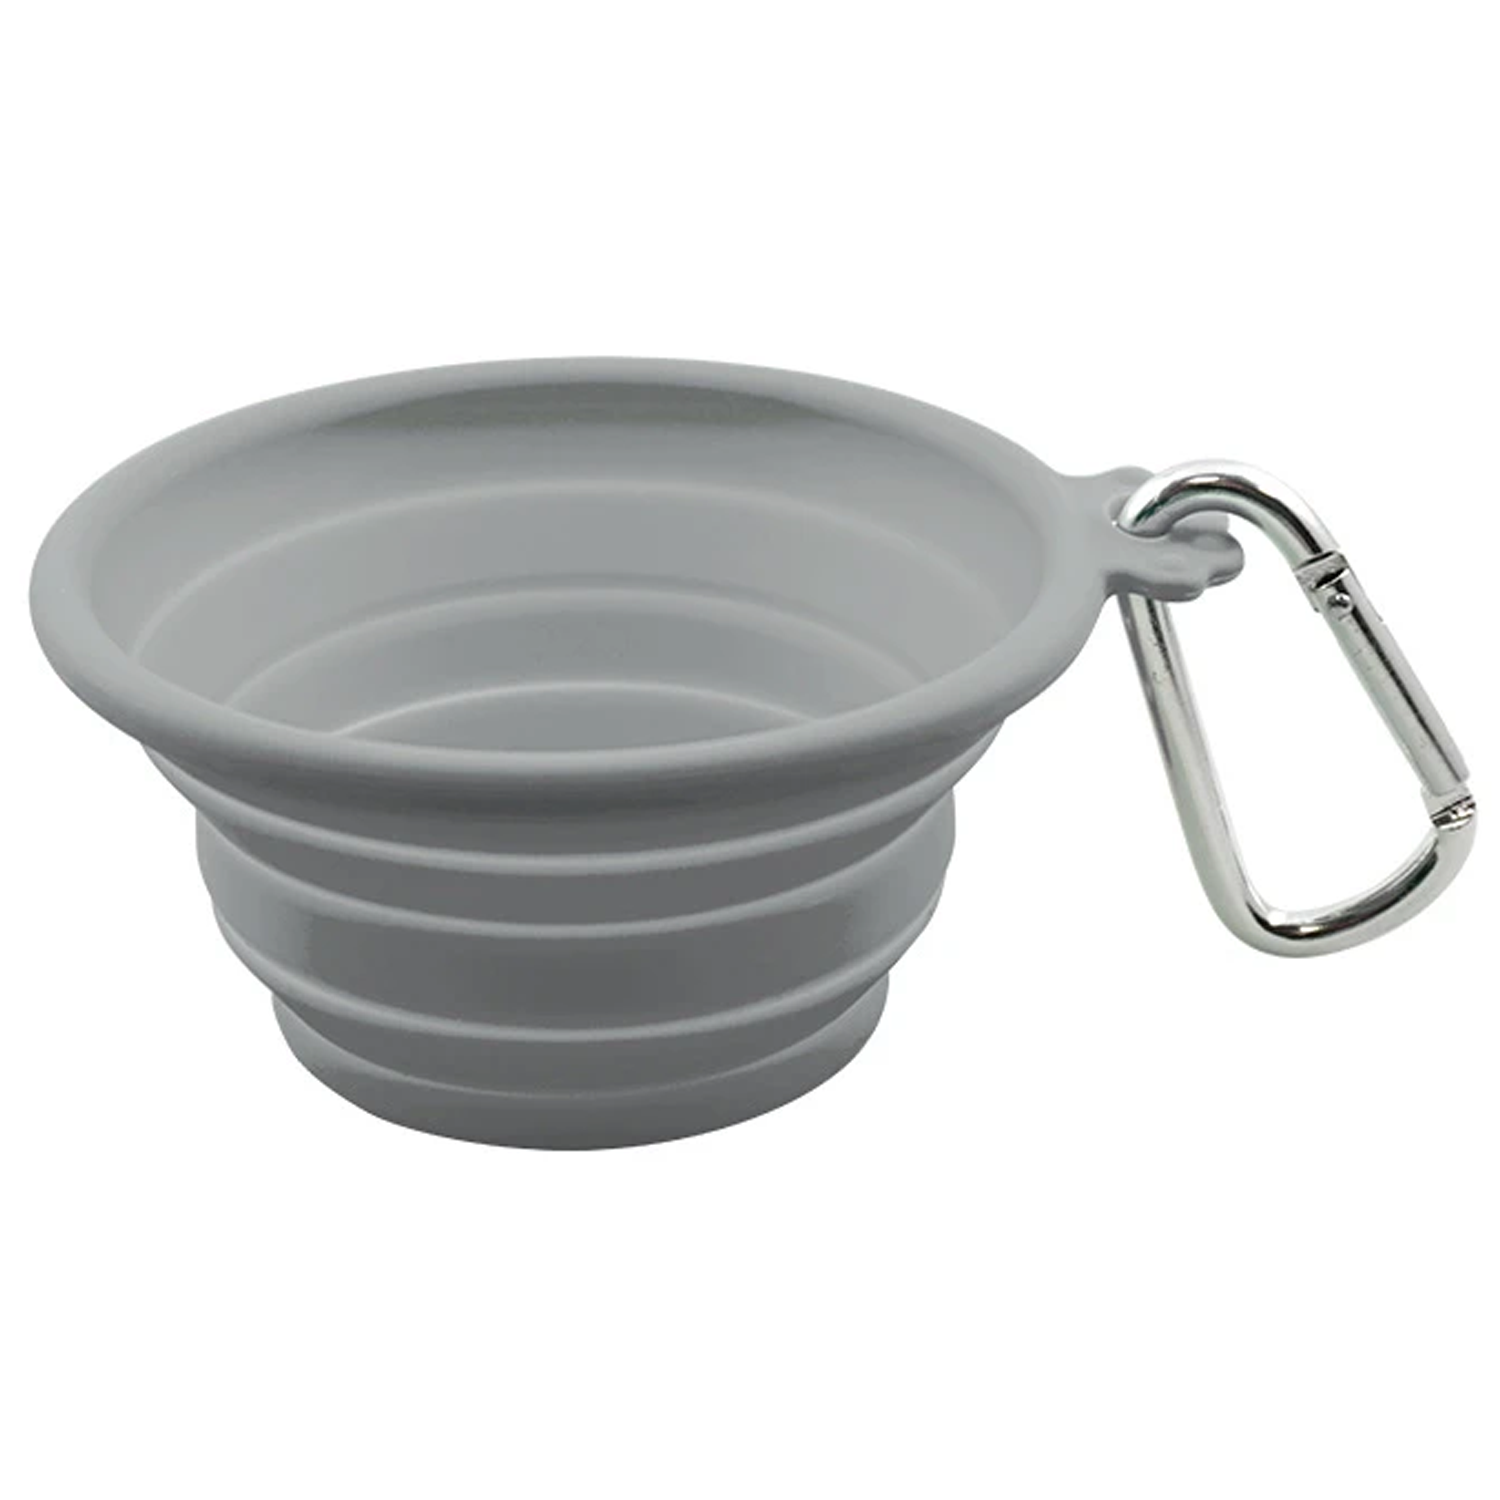 Pet Boutique - Dog Dining - Dog Bowls - Collapsible Silicone Travel Dog Bowl by Fou Fou Brand